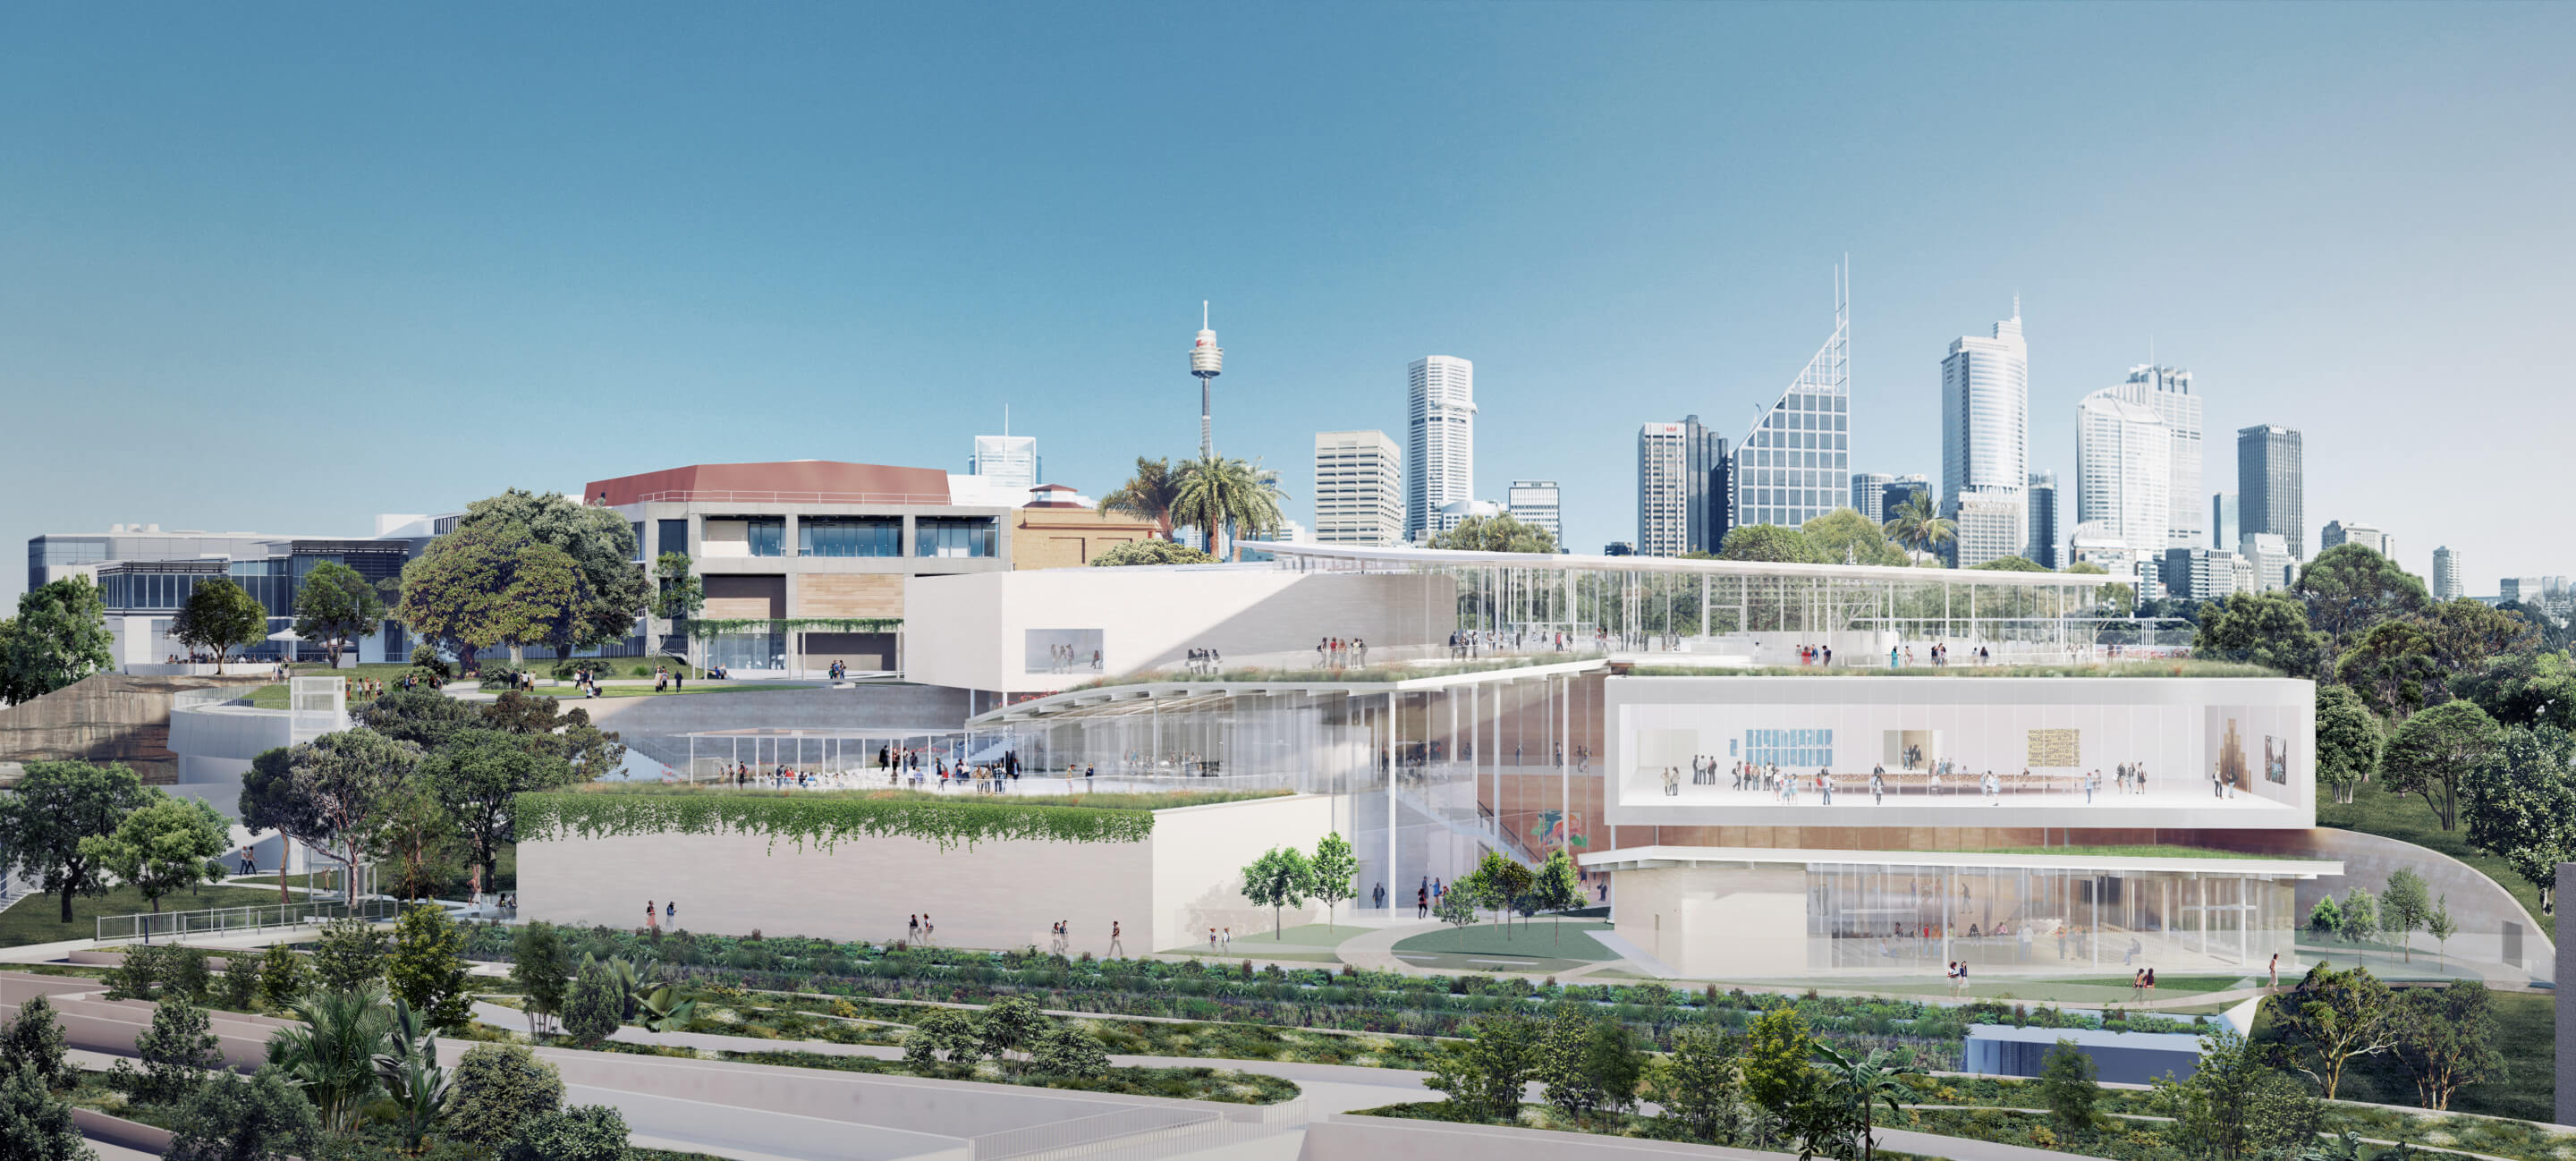 exterior rendering of a museum expansion project